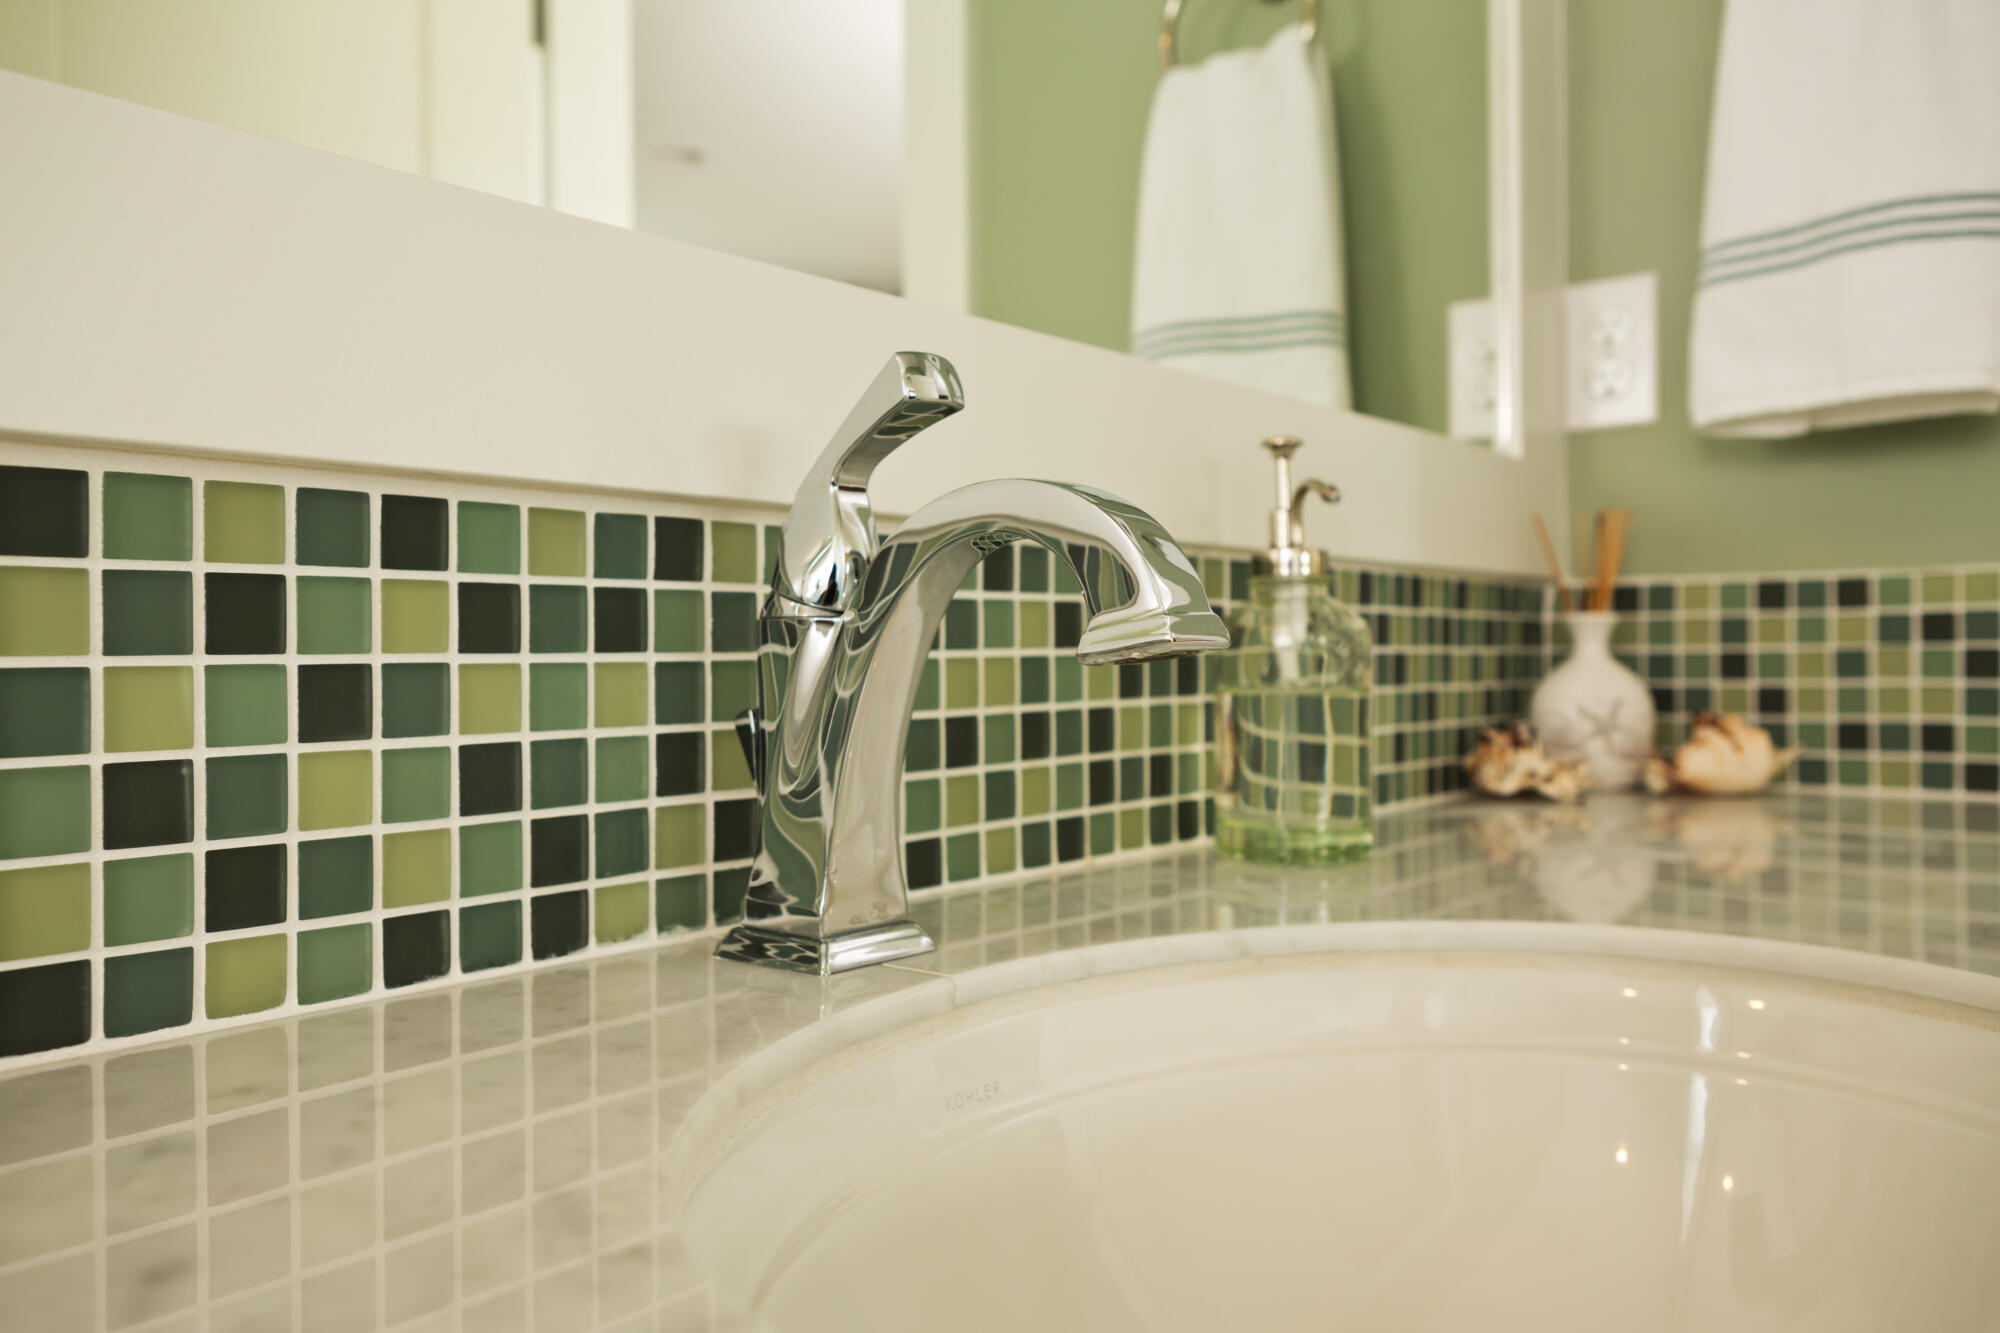 A bathroom with green and white tiled walls.